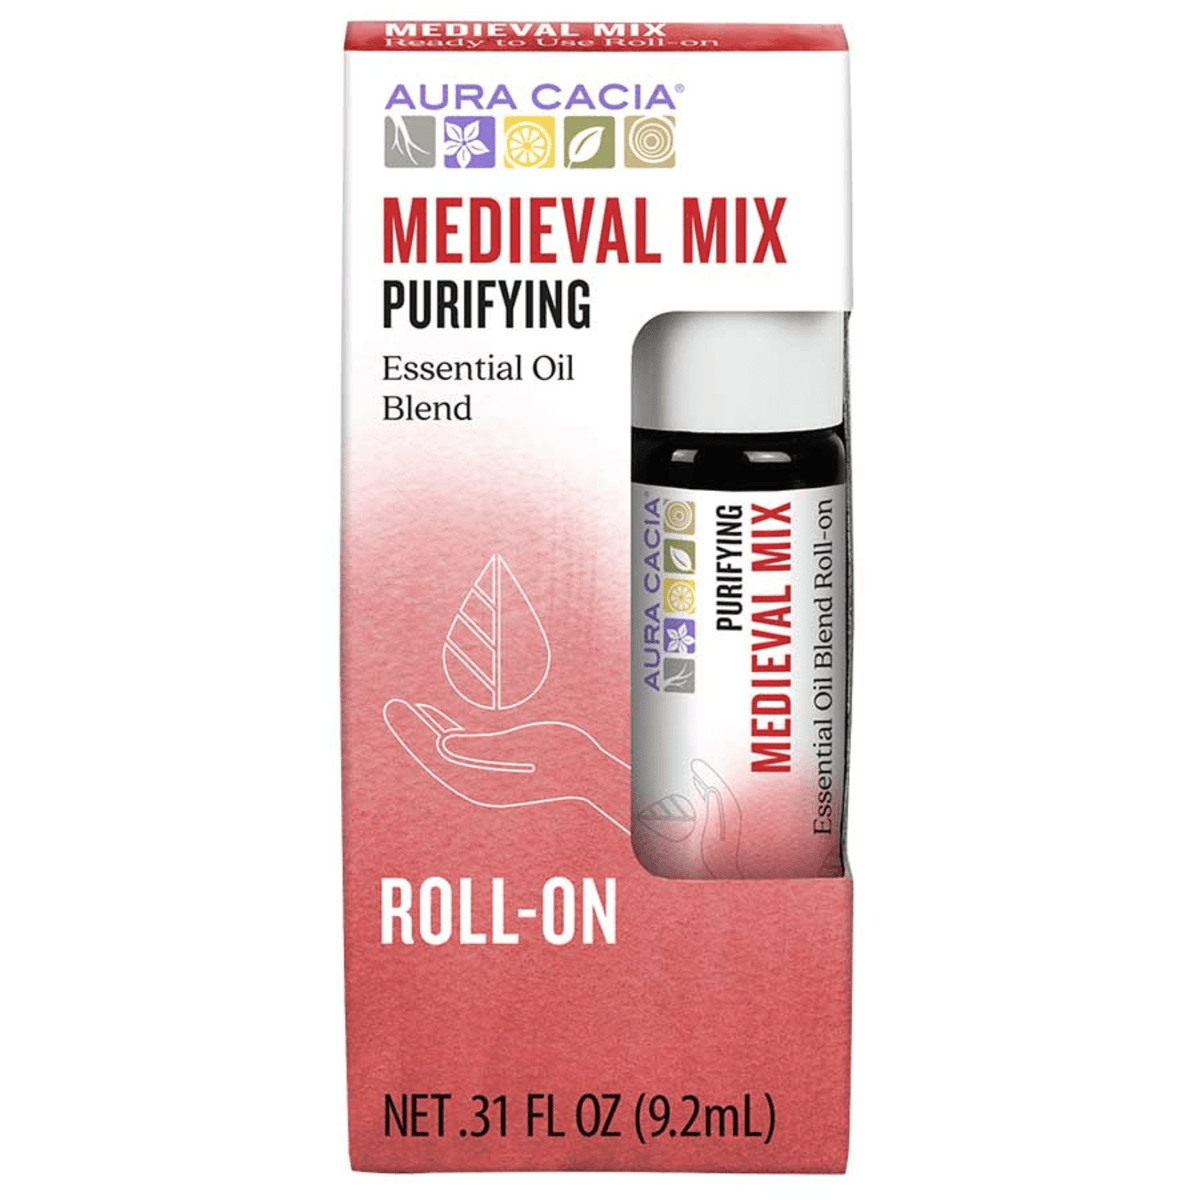 Primary Image of Medieval Mix Purifying Roll On